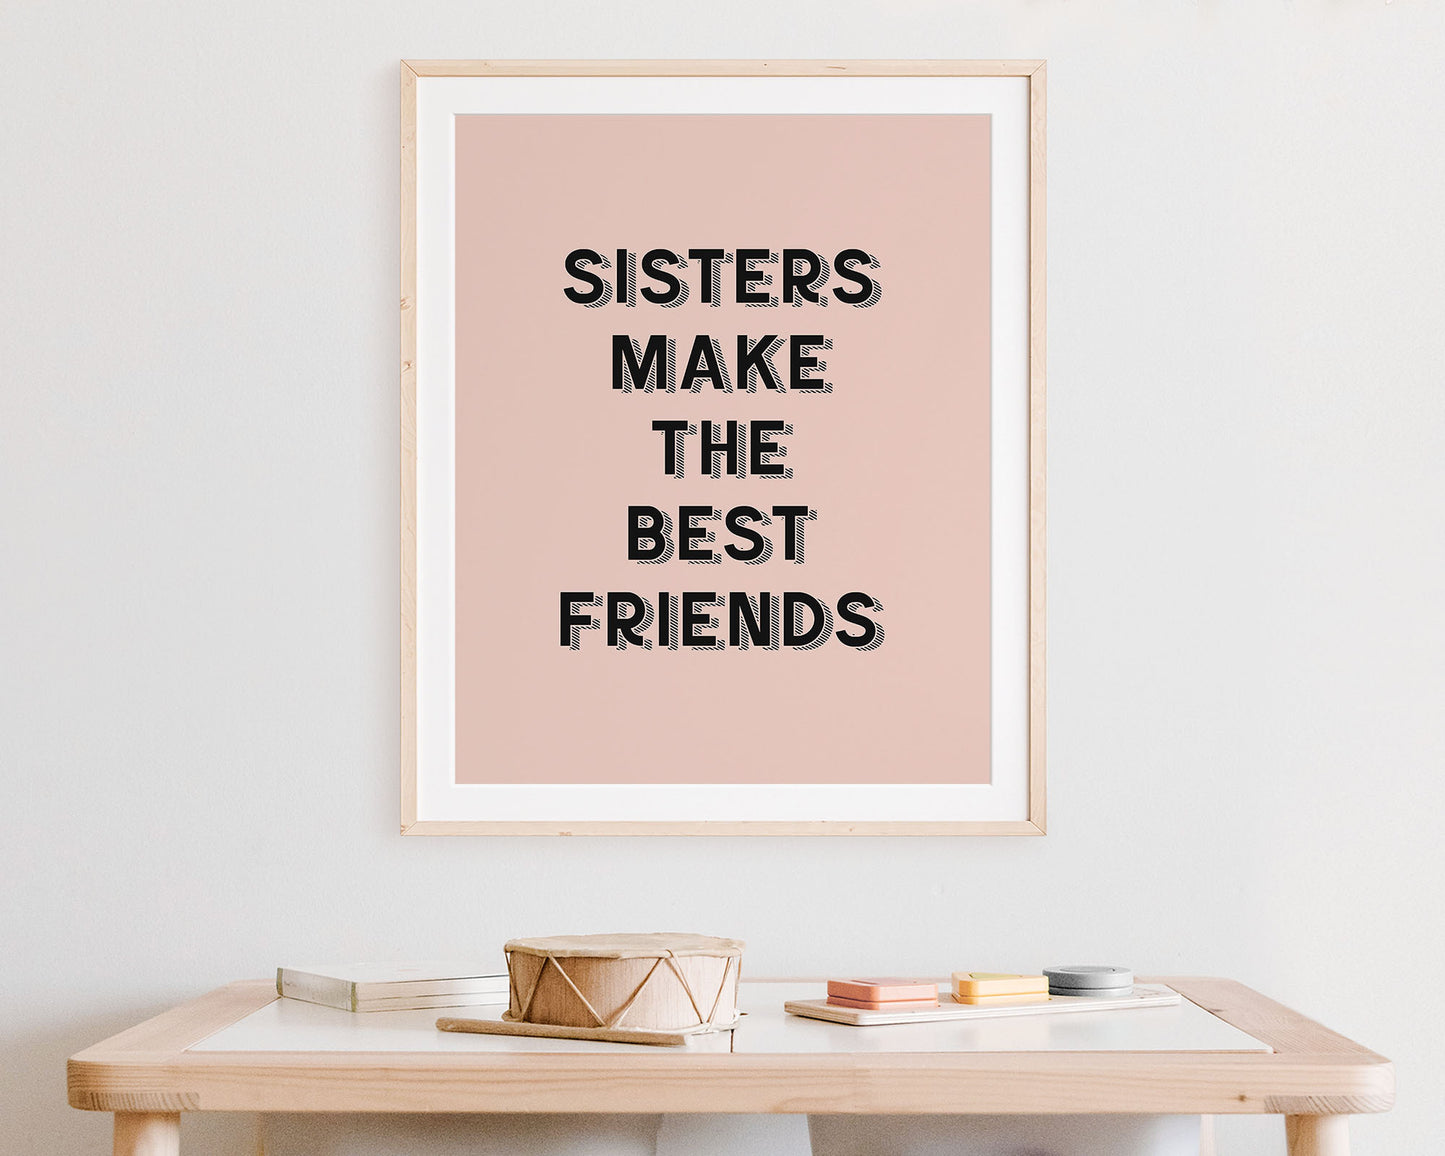 Sisters Make The Best Friends Instant Download Digital File featuring retro block shadowed lettering in black on a blush pink background.